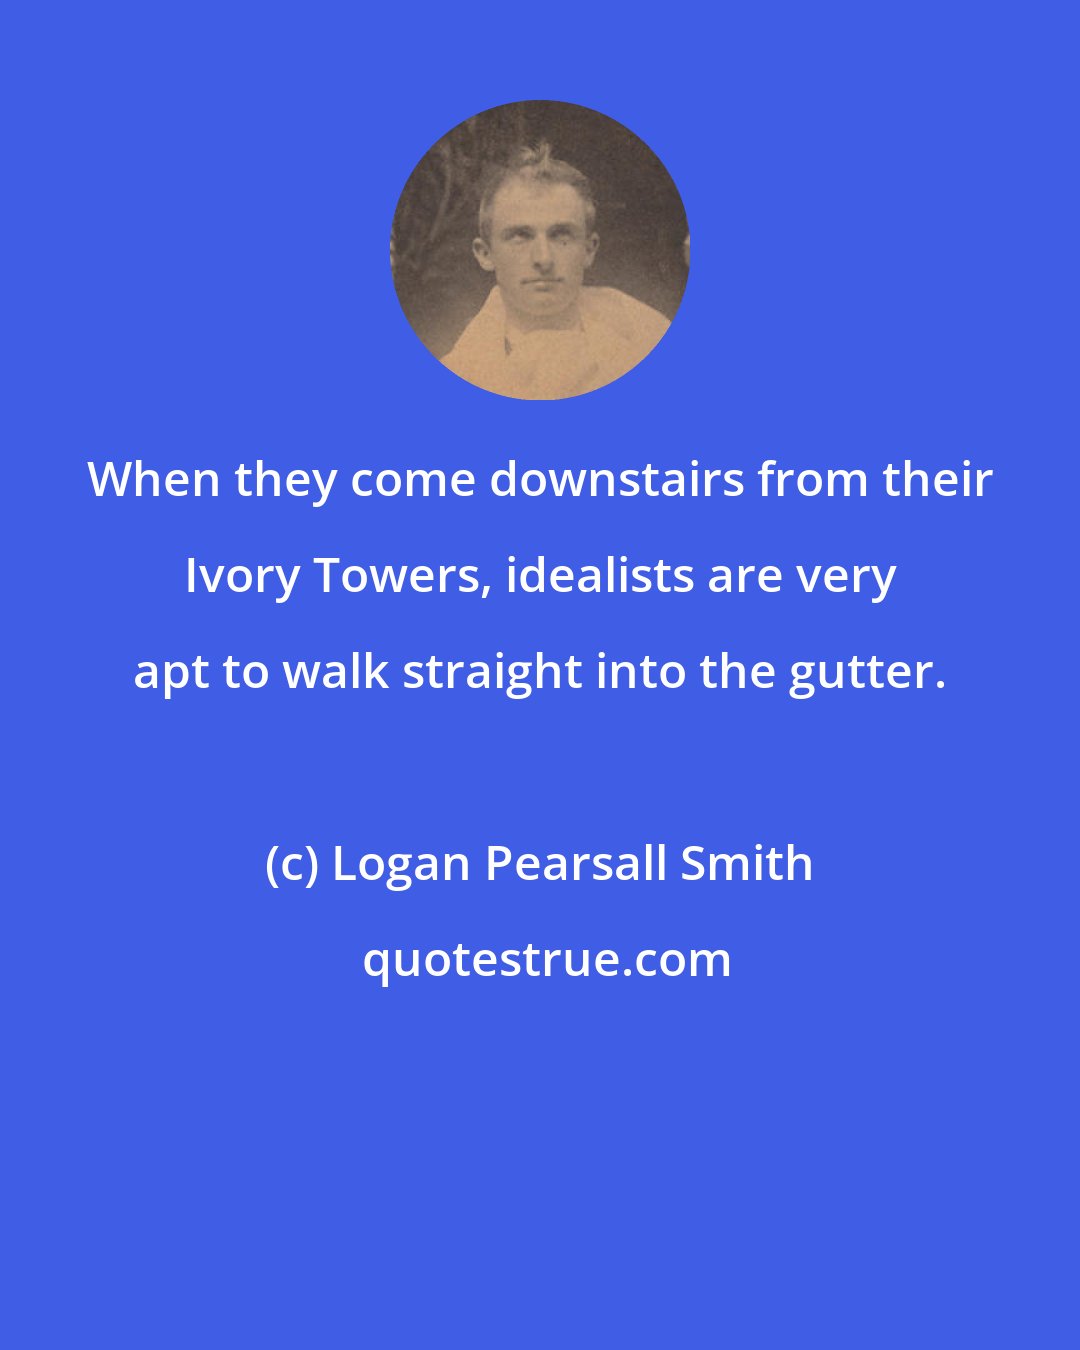 Logan Pearsall Smith: When they come downstairs from their Ivory Towers, idealists are very apt to walk straight into the gutter.